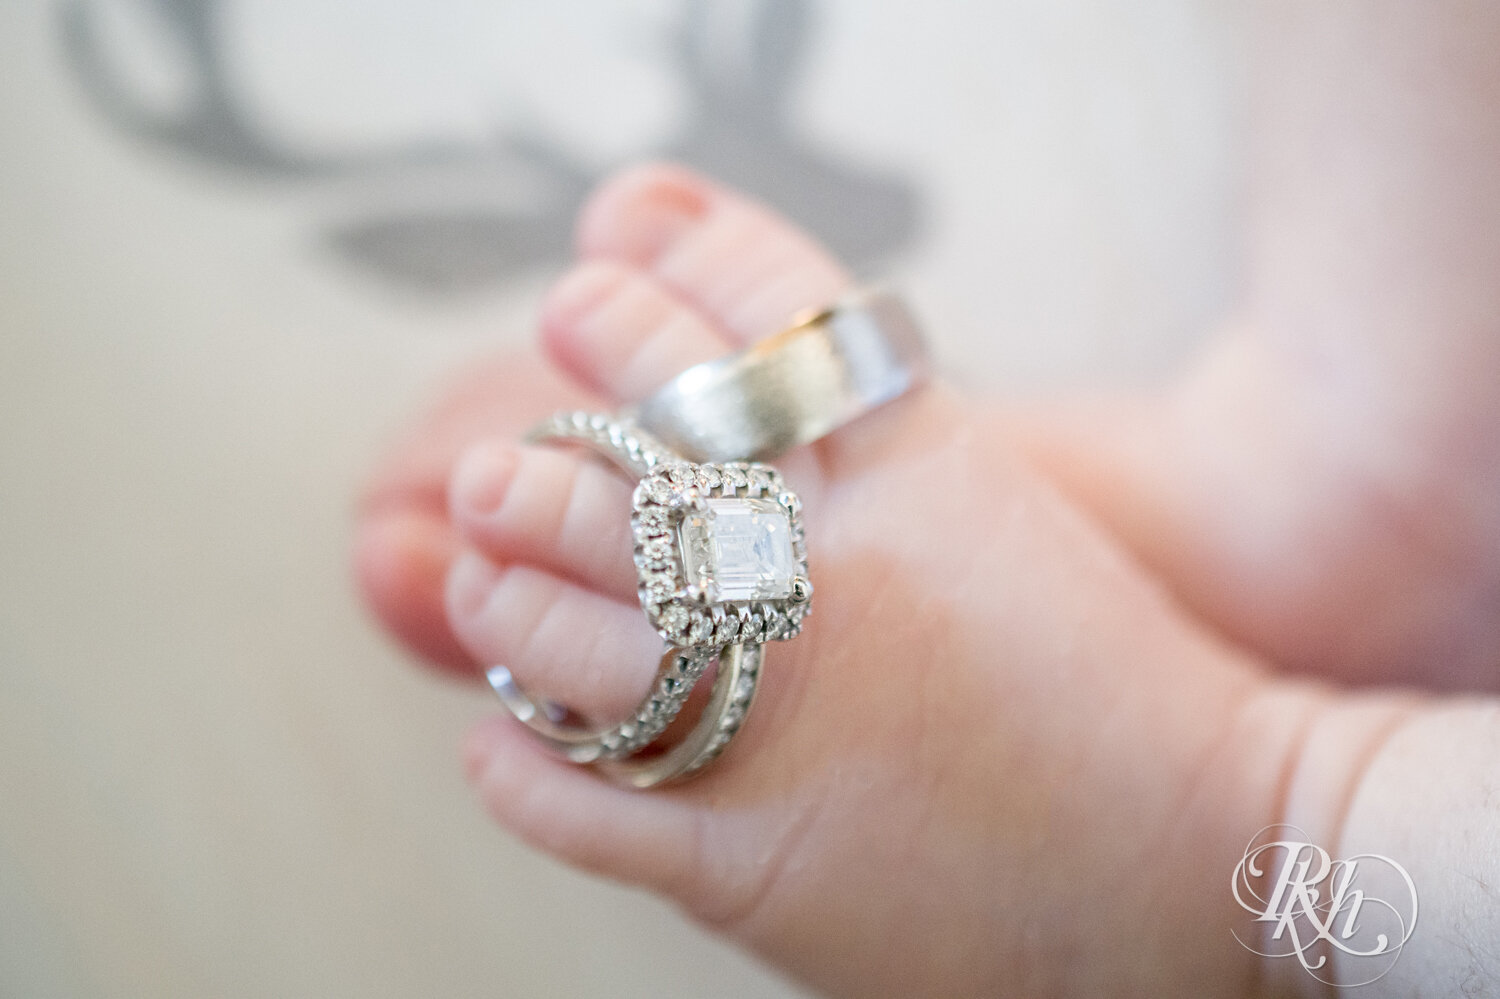 Wedding rings on baby toes